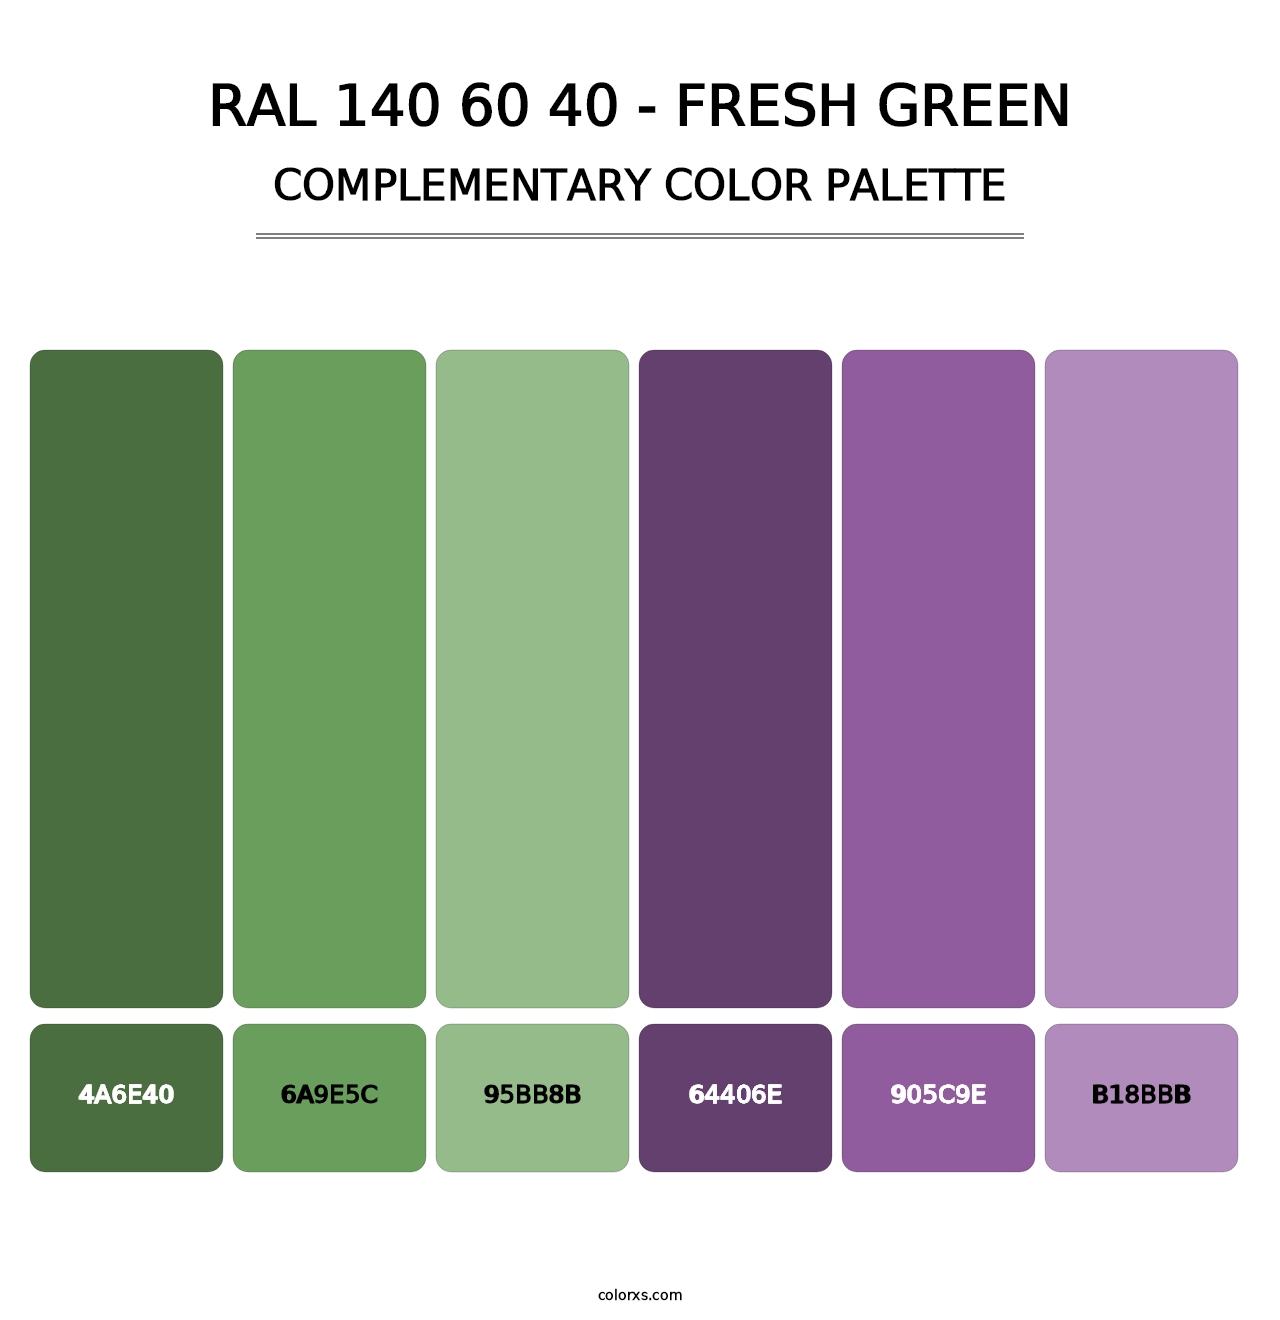 RAL 140 60 40 - Fresh Green - Complementary Color Palette